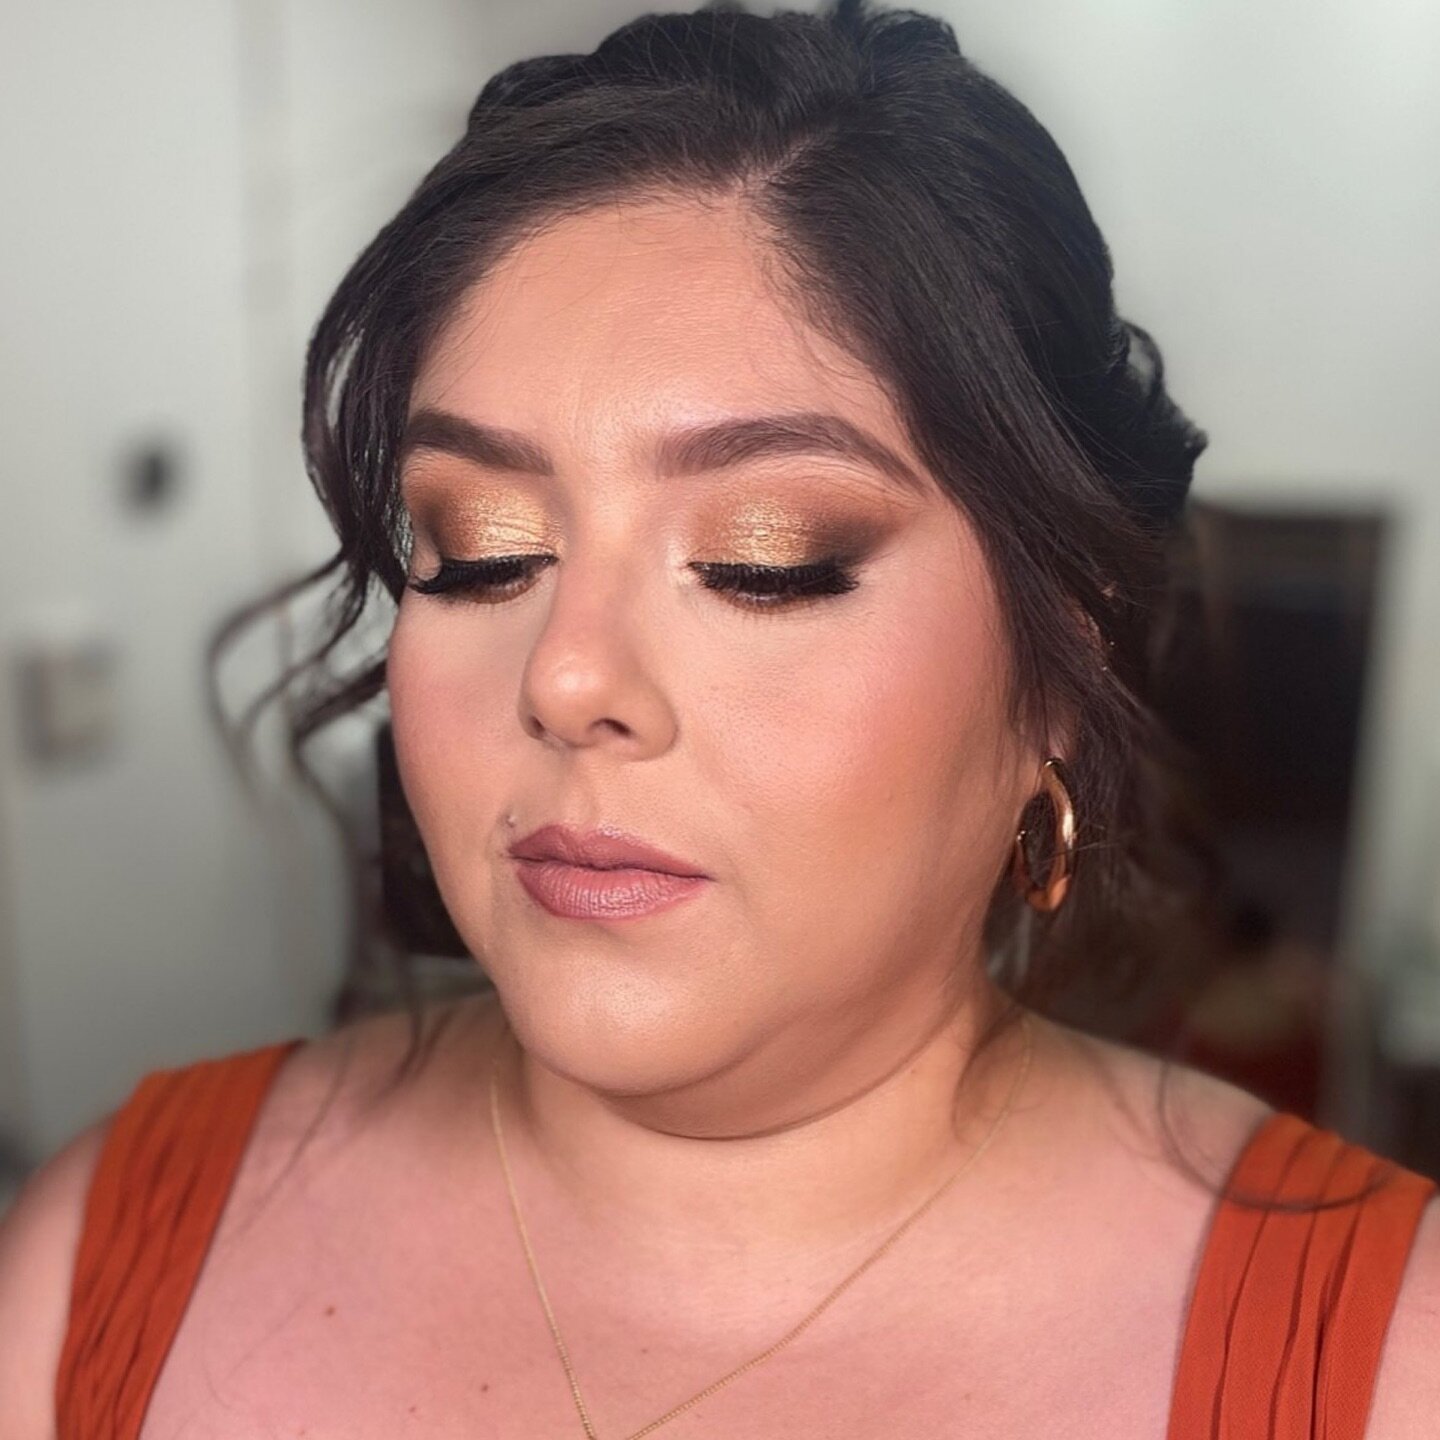 These neutrals and golds totally compliment her dress! Gotta love a good smokey eye for a Vegas wedding!